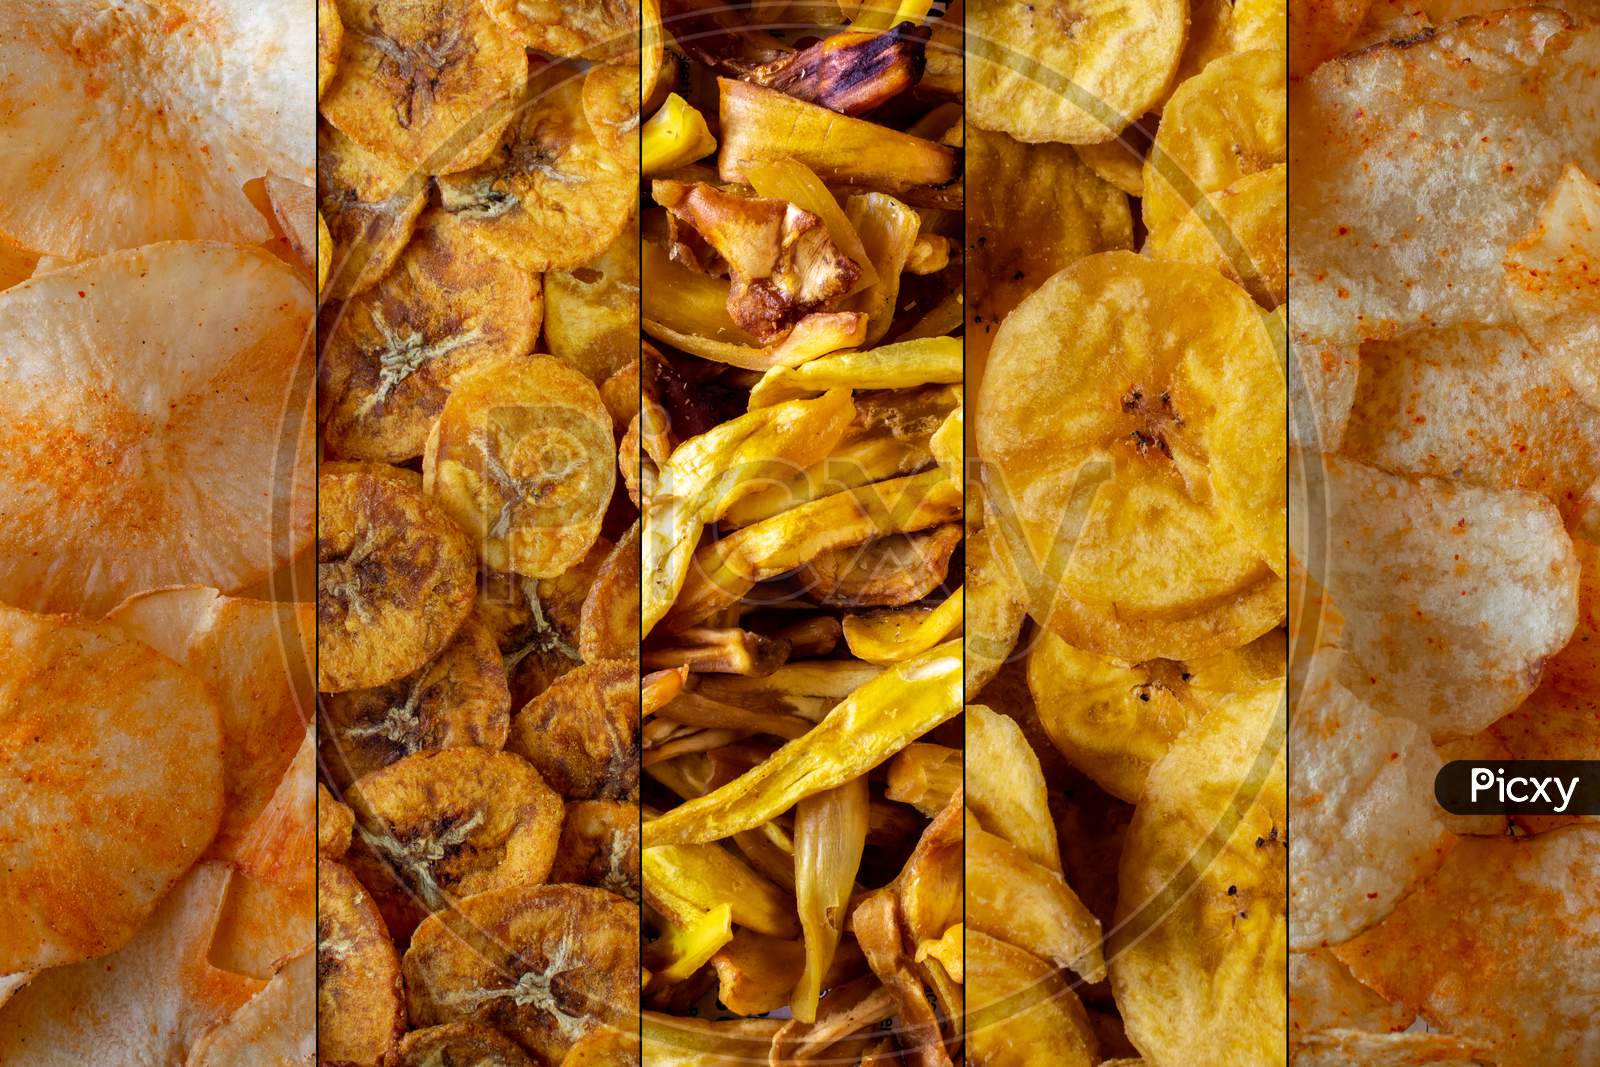 Variety Chips Of Potato, Banana, Jackfruit And Cassava. Kinds Of Common Chips Both Sweet And Tangy